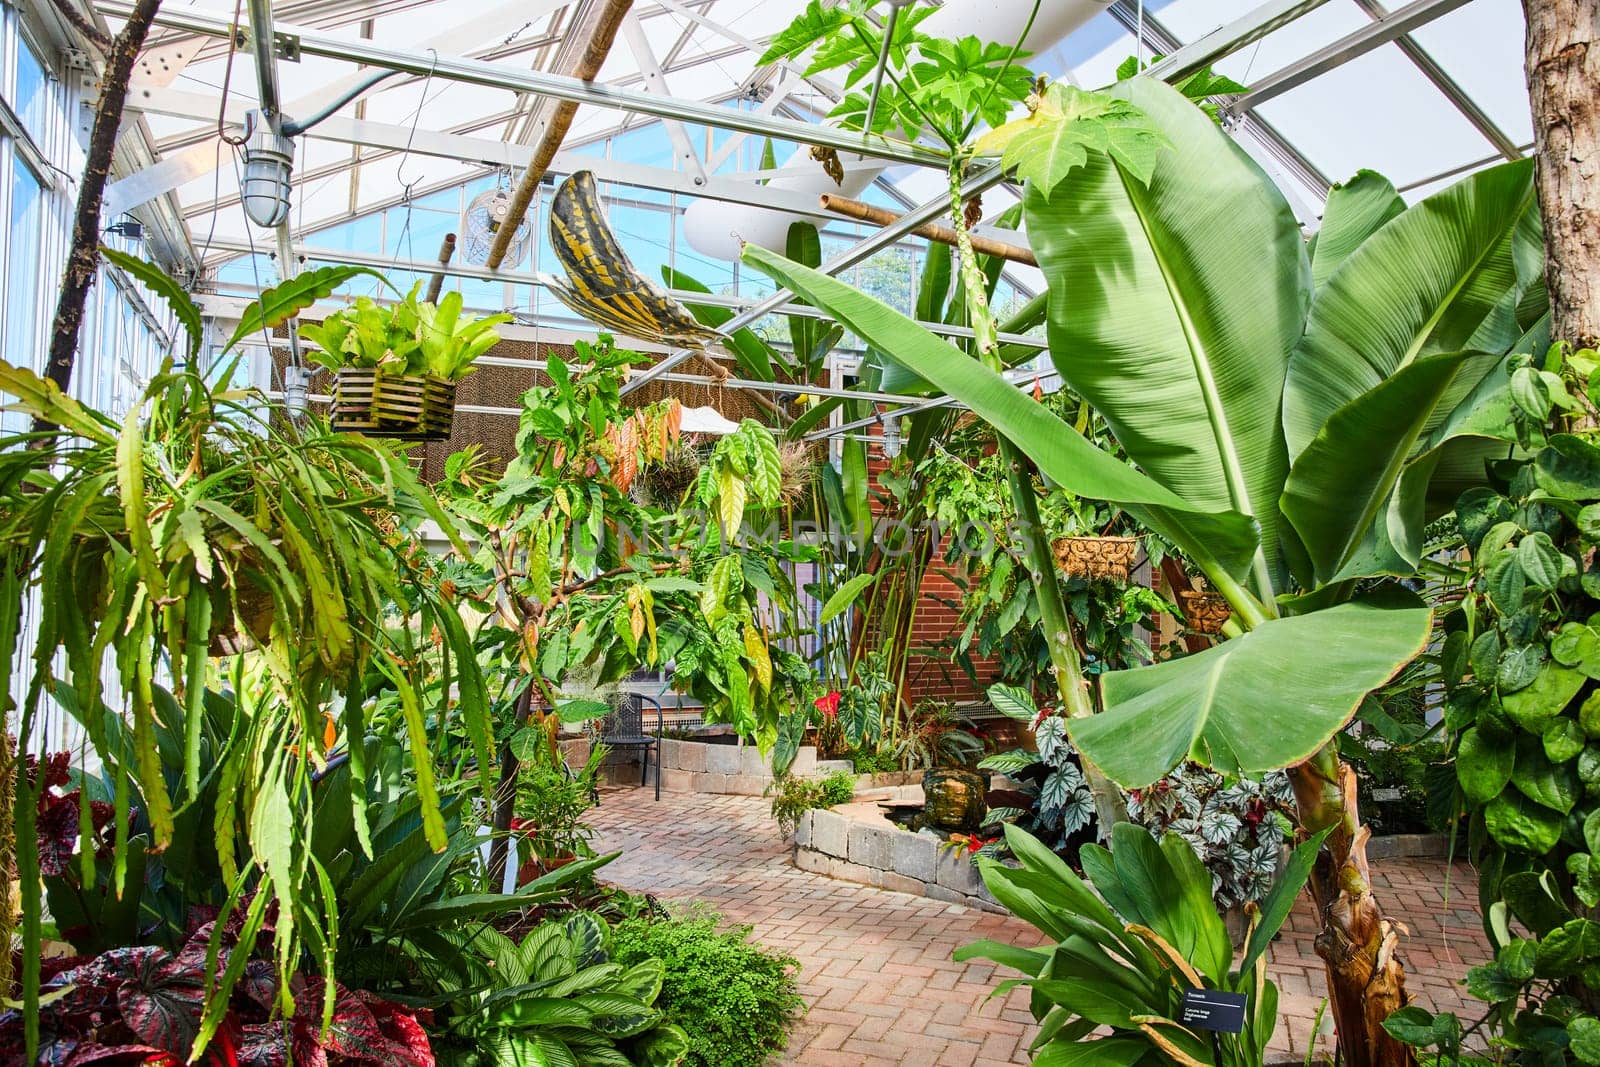 Tropical Greenhouse Oasis with Banana Leaves and Ferns, Eye-Level View by njproductions